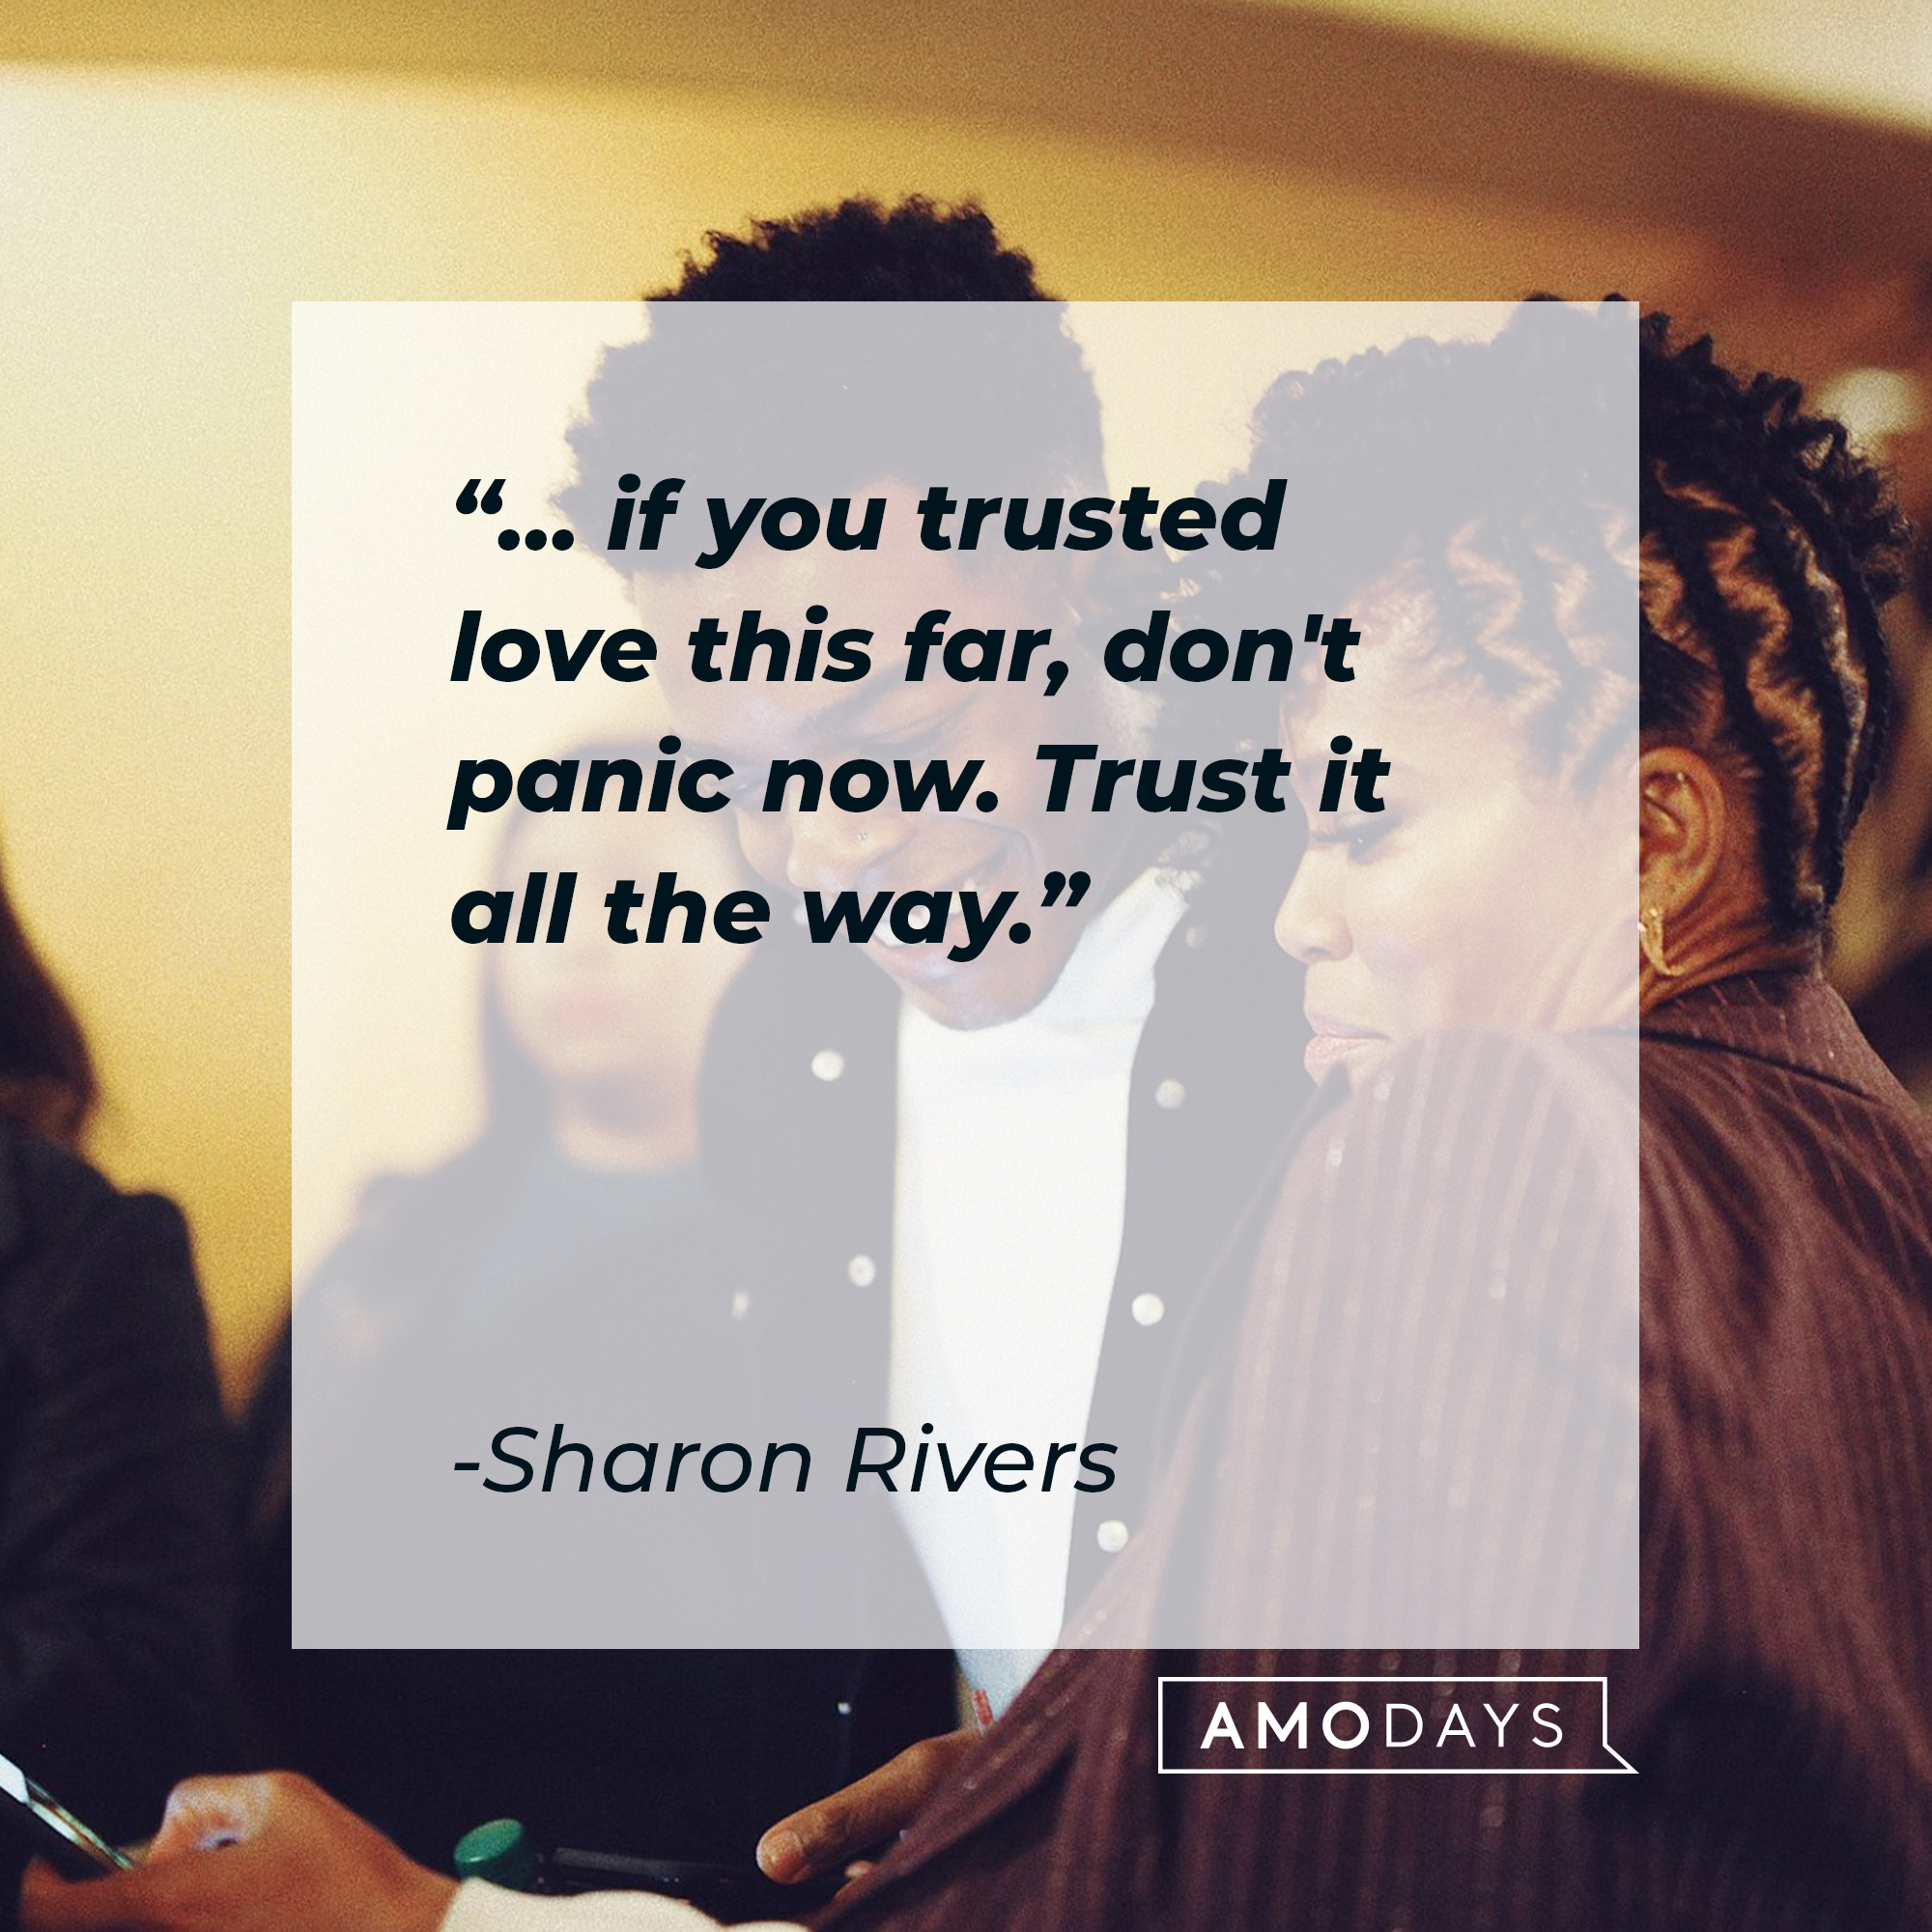 Sharon Rivers quote: "... if you trusted love this far, don't panic now. Trust it all the way." | Source: facebook.com/BealeStreet